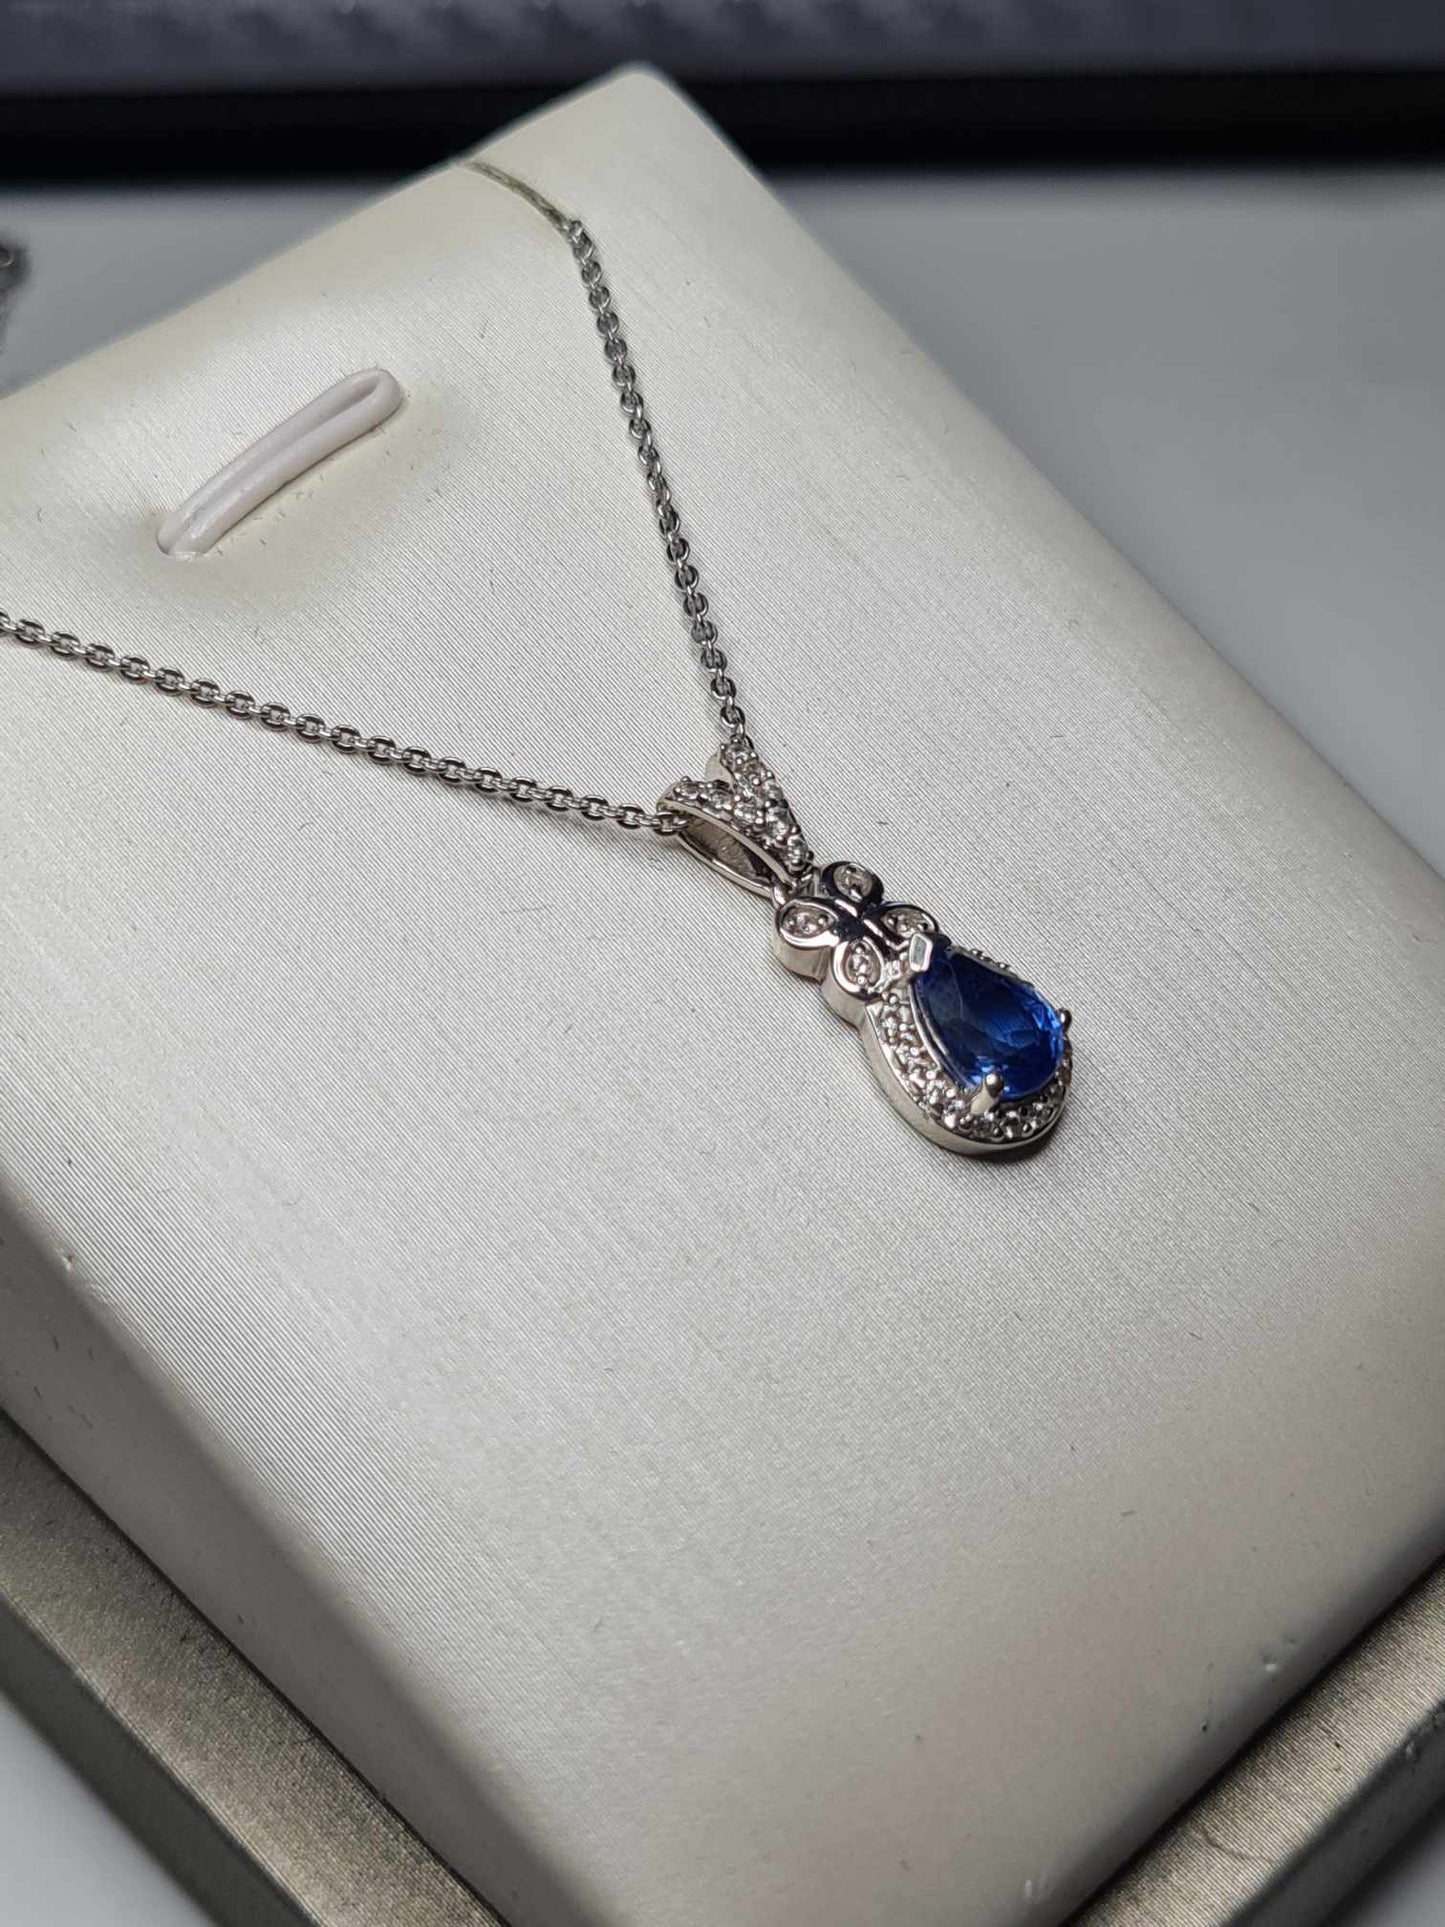 1.15ct Natural Himalayan Kyanite & Natural Zircon Necklace in Platinum Overlay 925 Sterling Silver